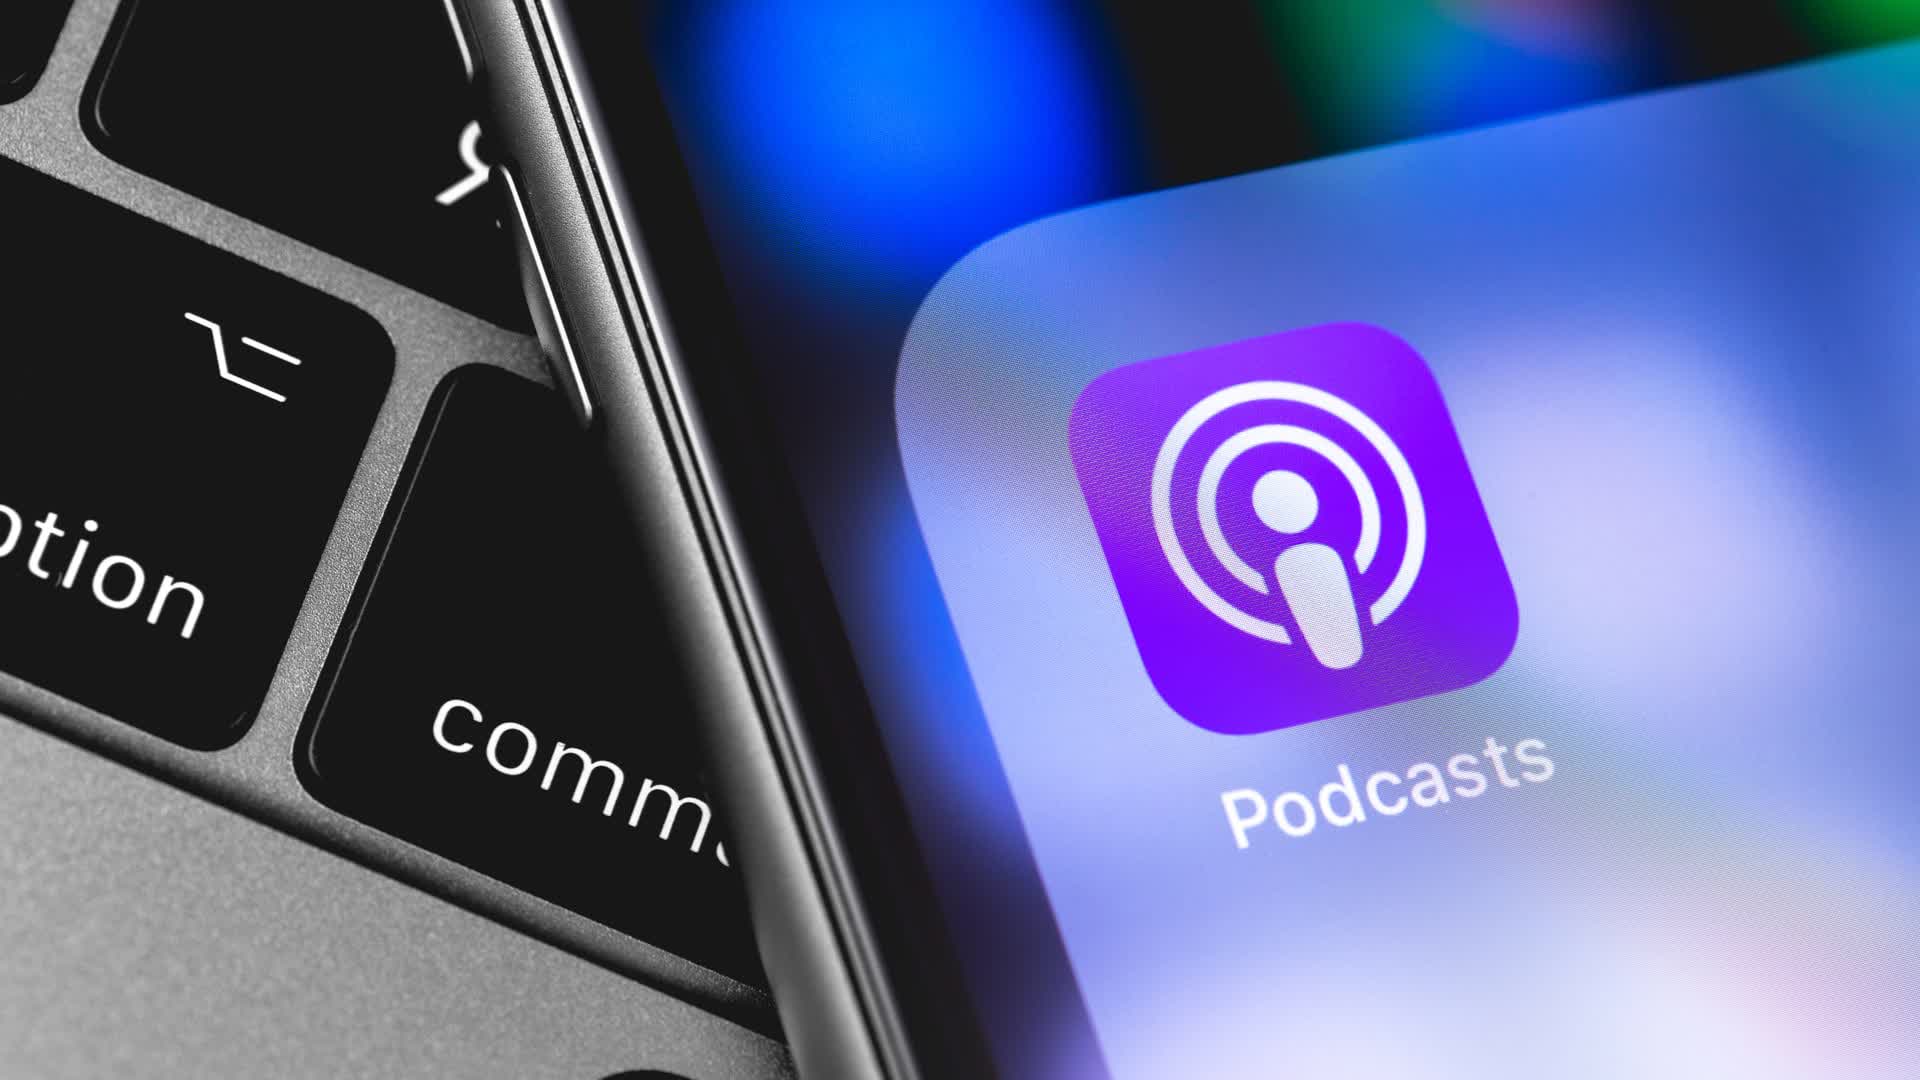 Apple could launch podcast subscription service in 2021